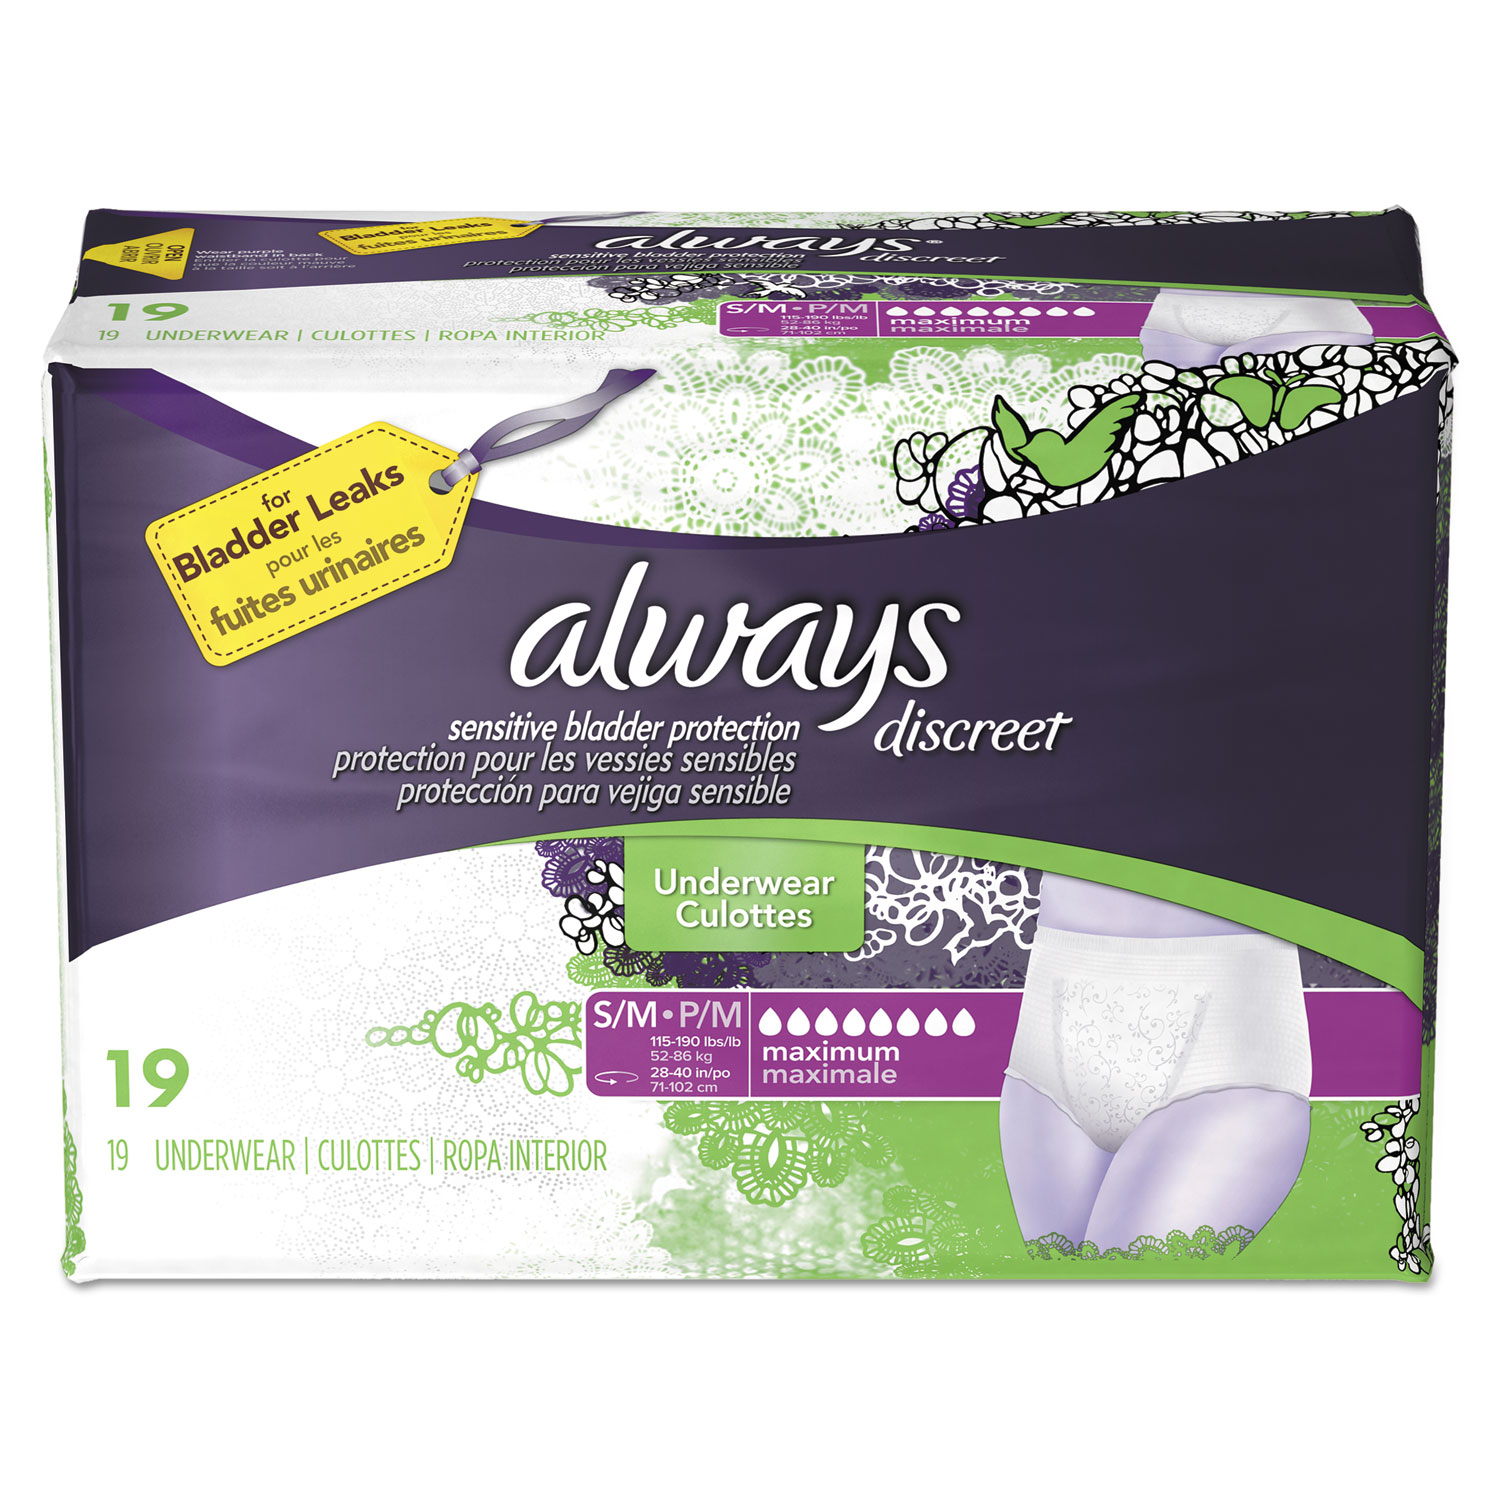 Discreet Incontinence Underwear by Always® PGC92735PK